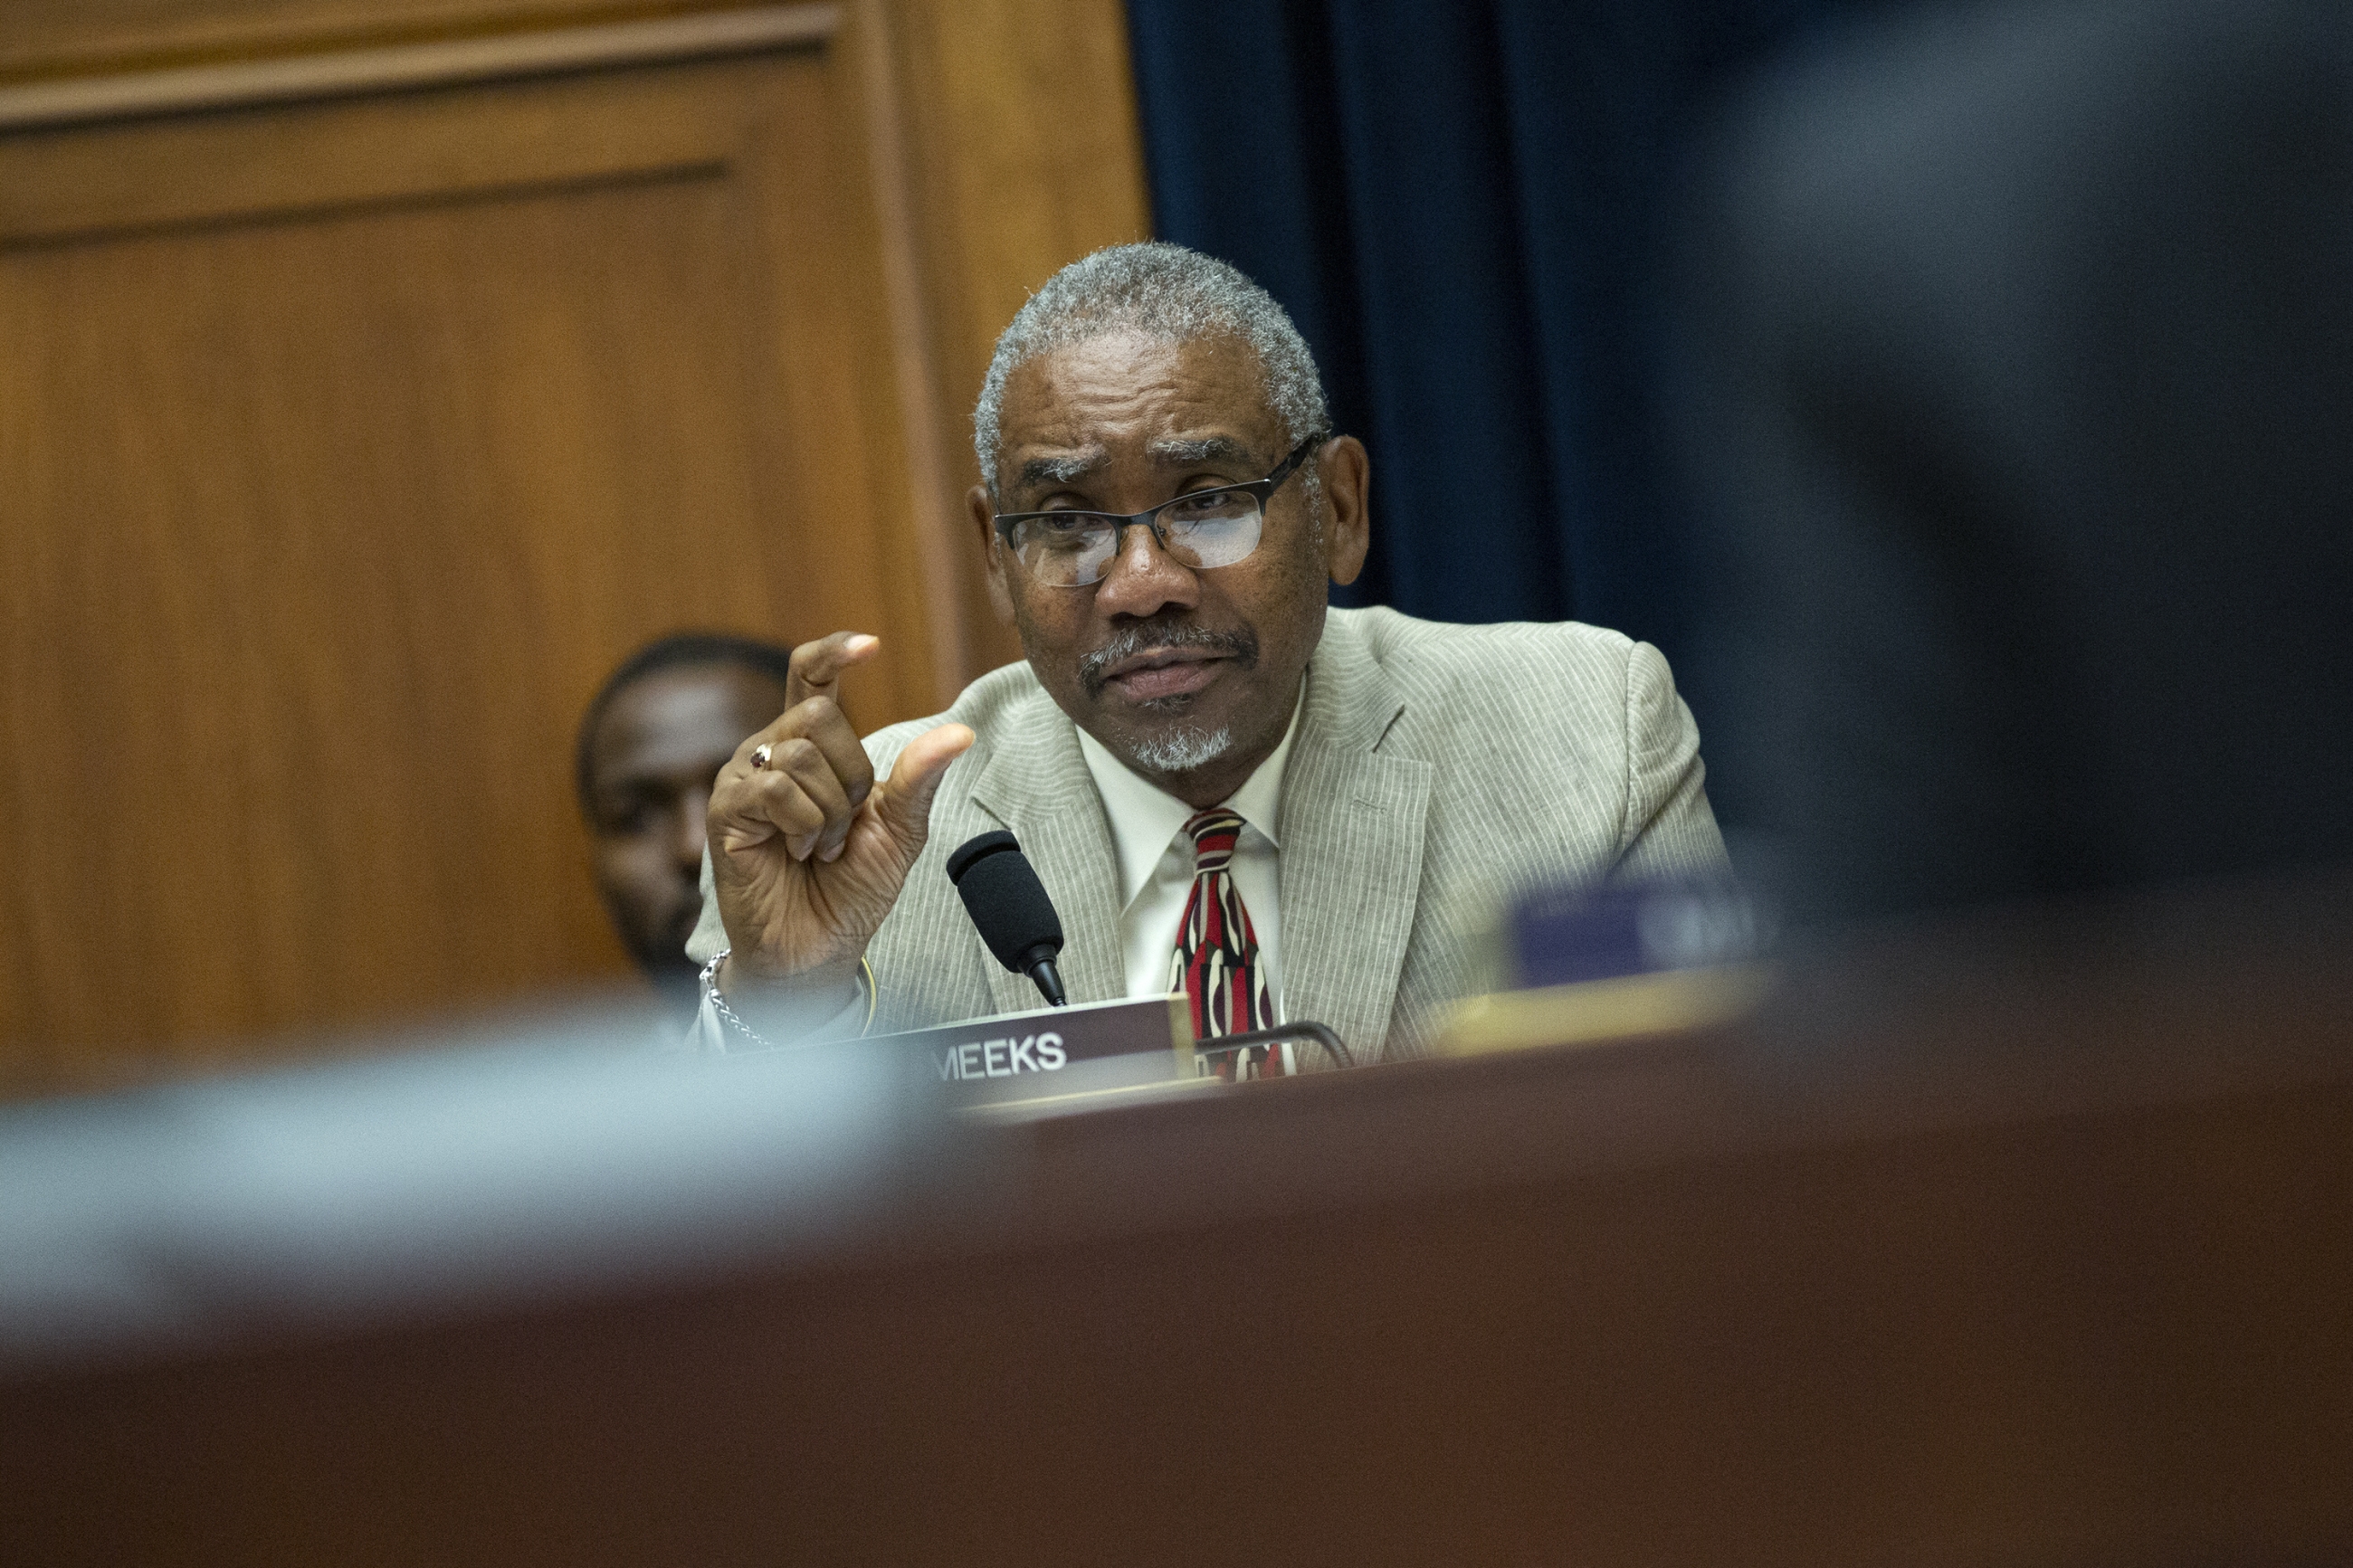 Gregory Meeks is the first Black American to lead the House Foreign Affairs Committee 